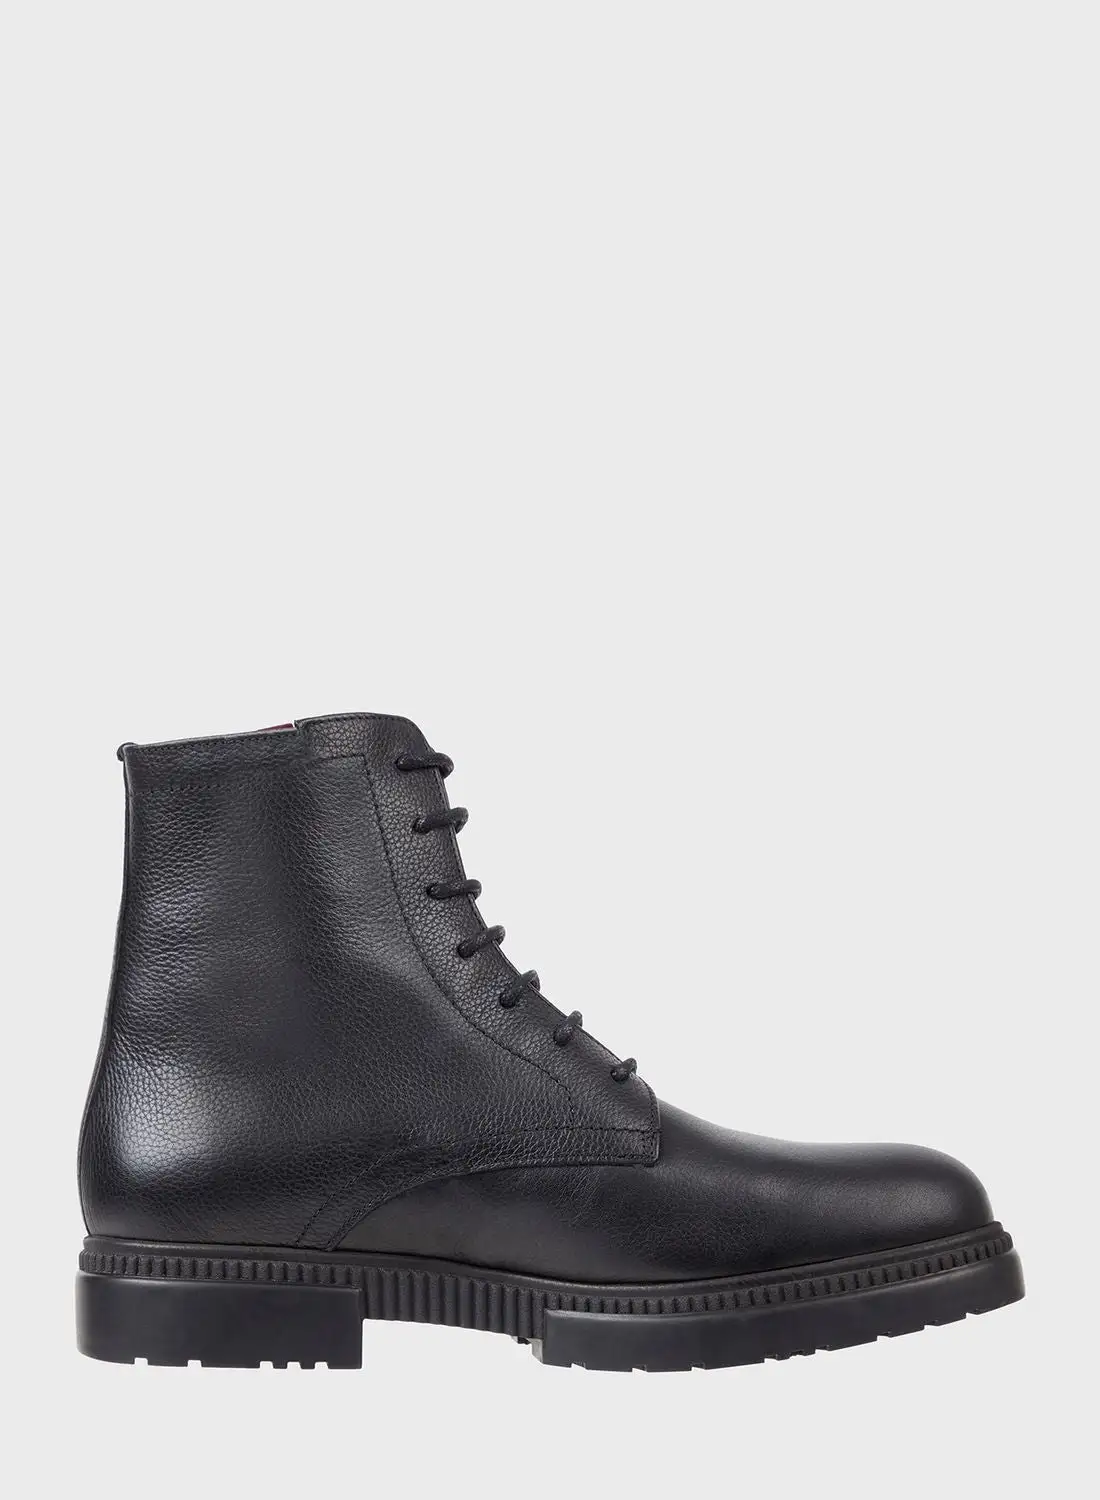 TOMMY HILFIGER Lace Up High Boots